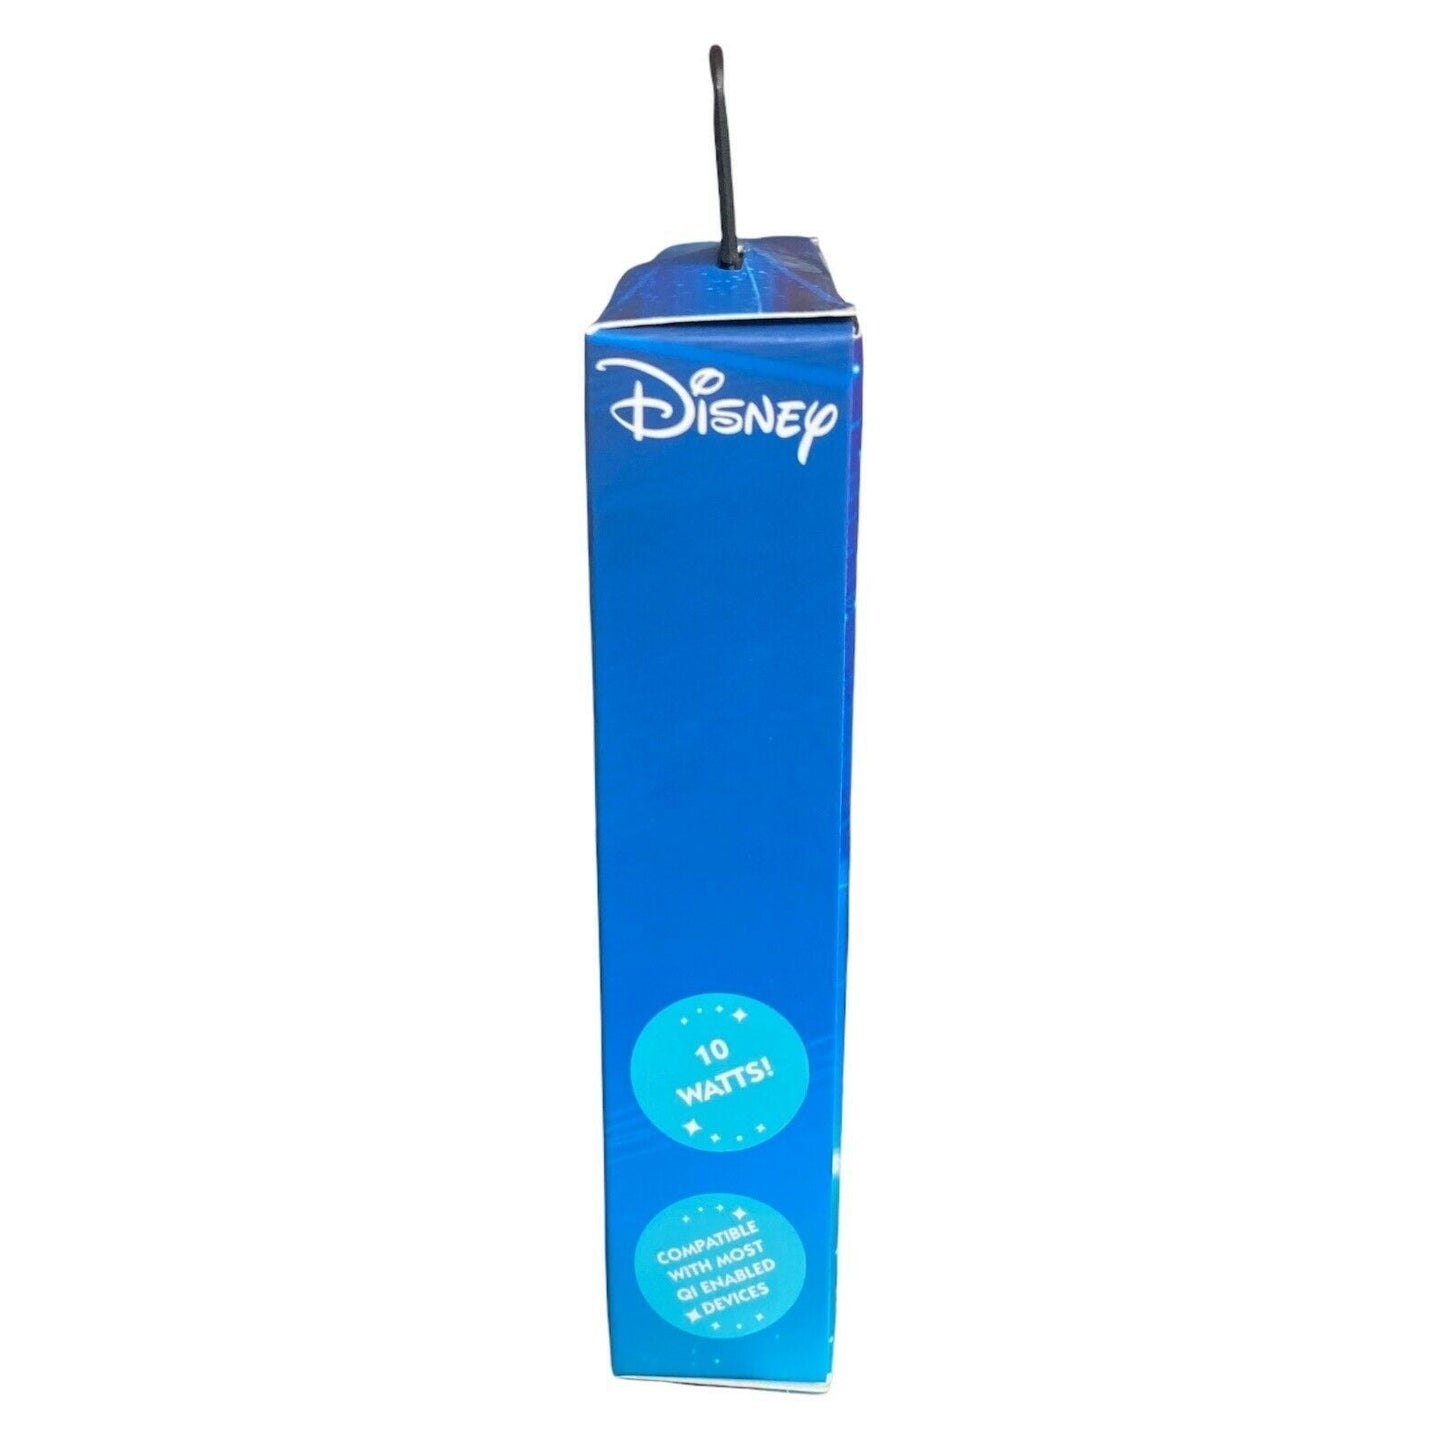 Disney Mickey Mouse USB Wireless Phone Charger - Qi Certified